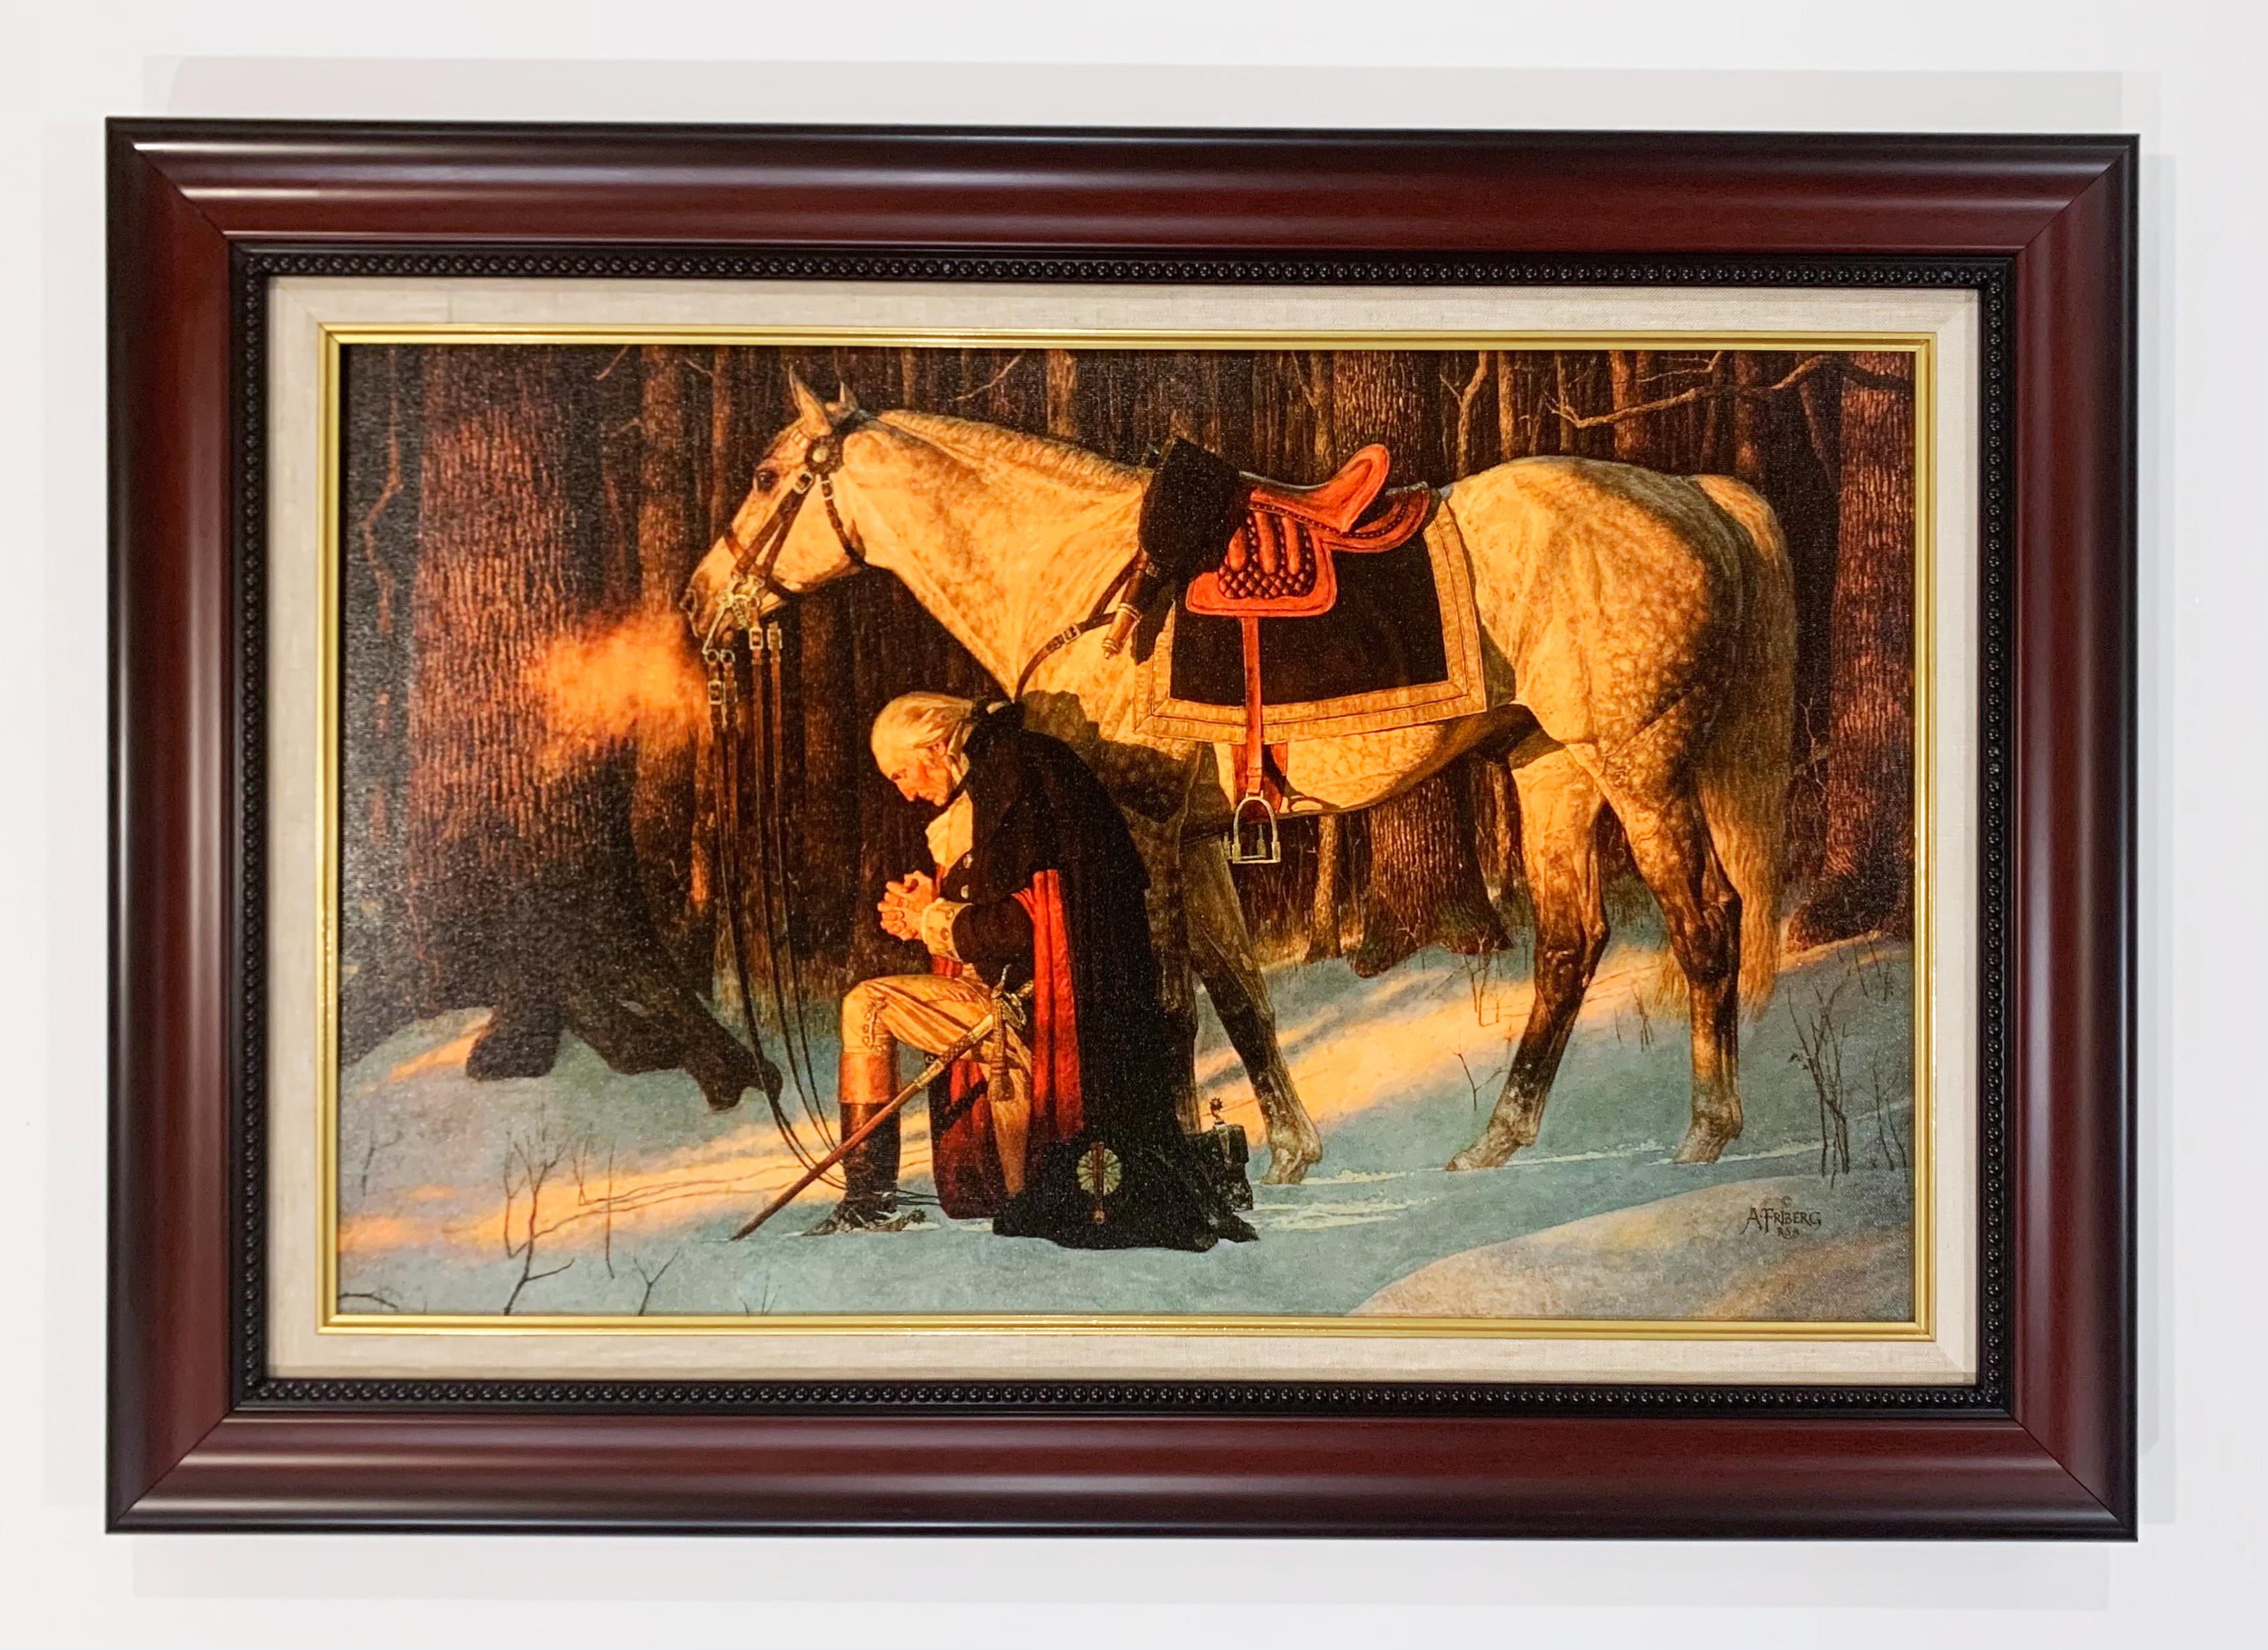 Arnold Friberg Portrait Print - The Prayer at Valley Forge